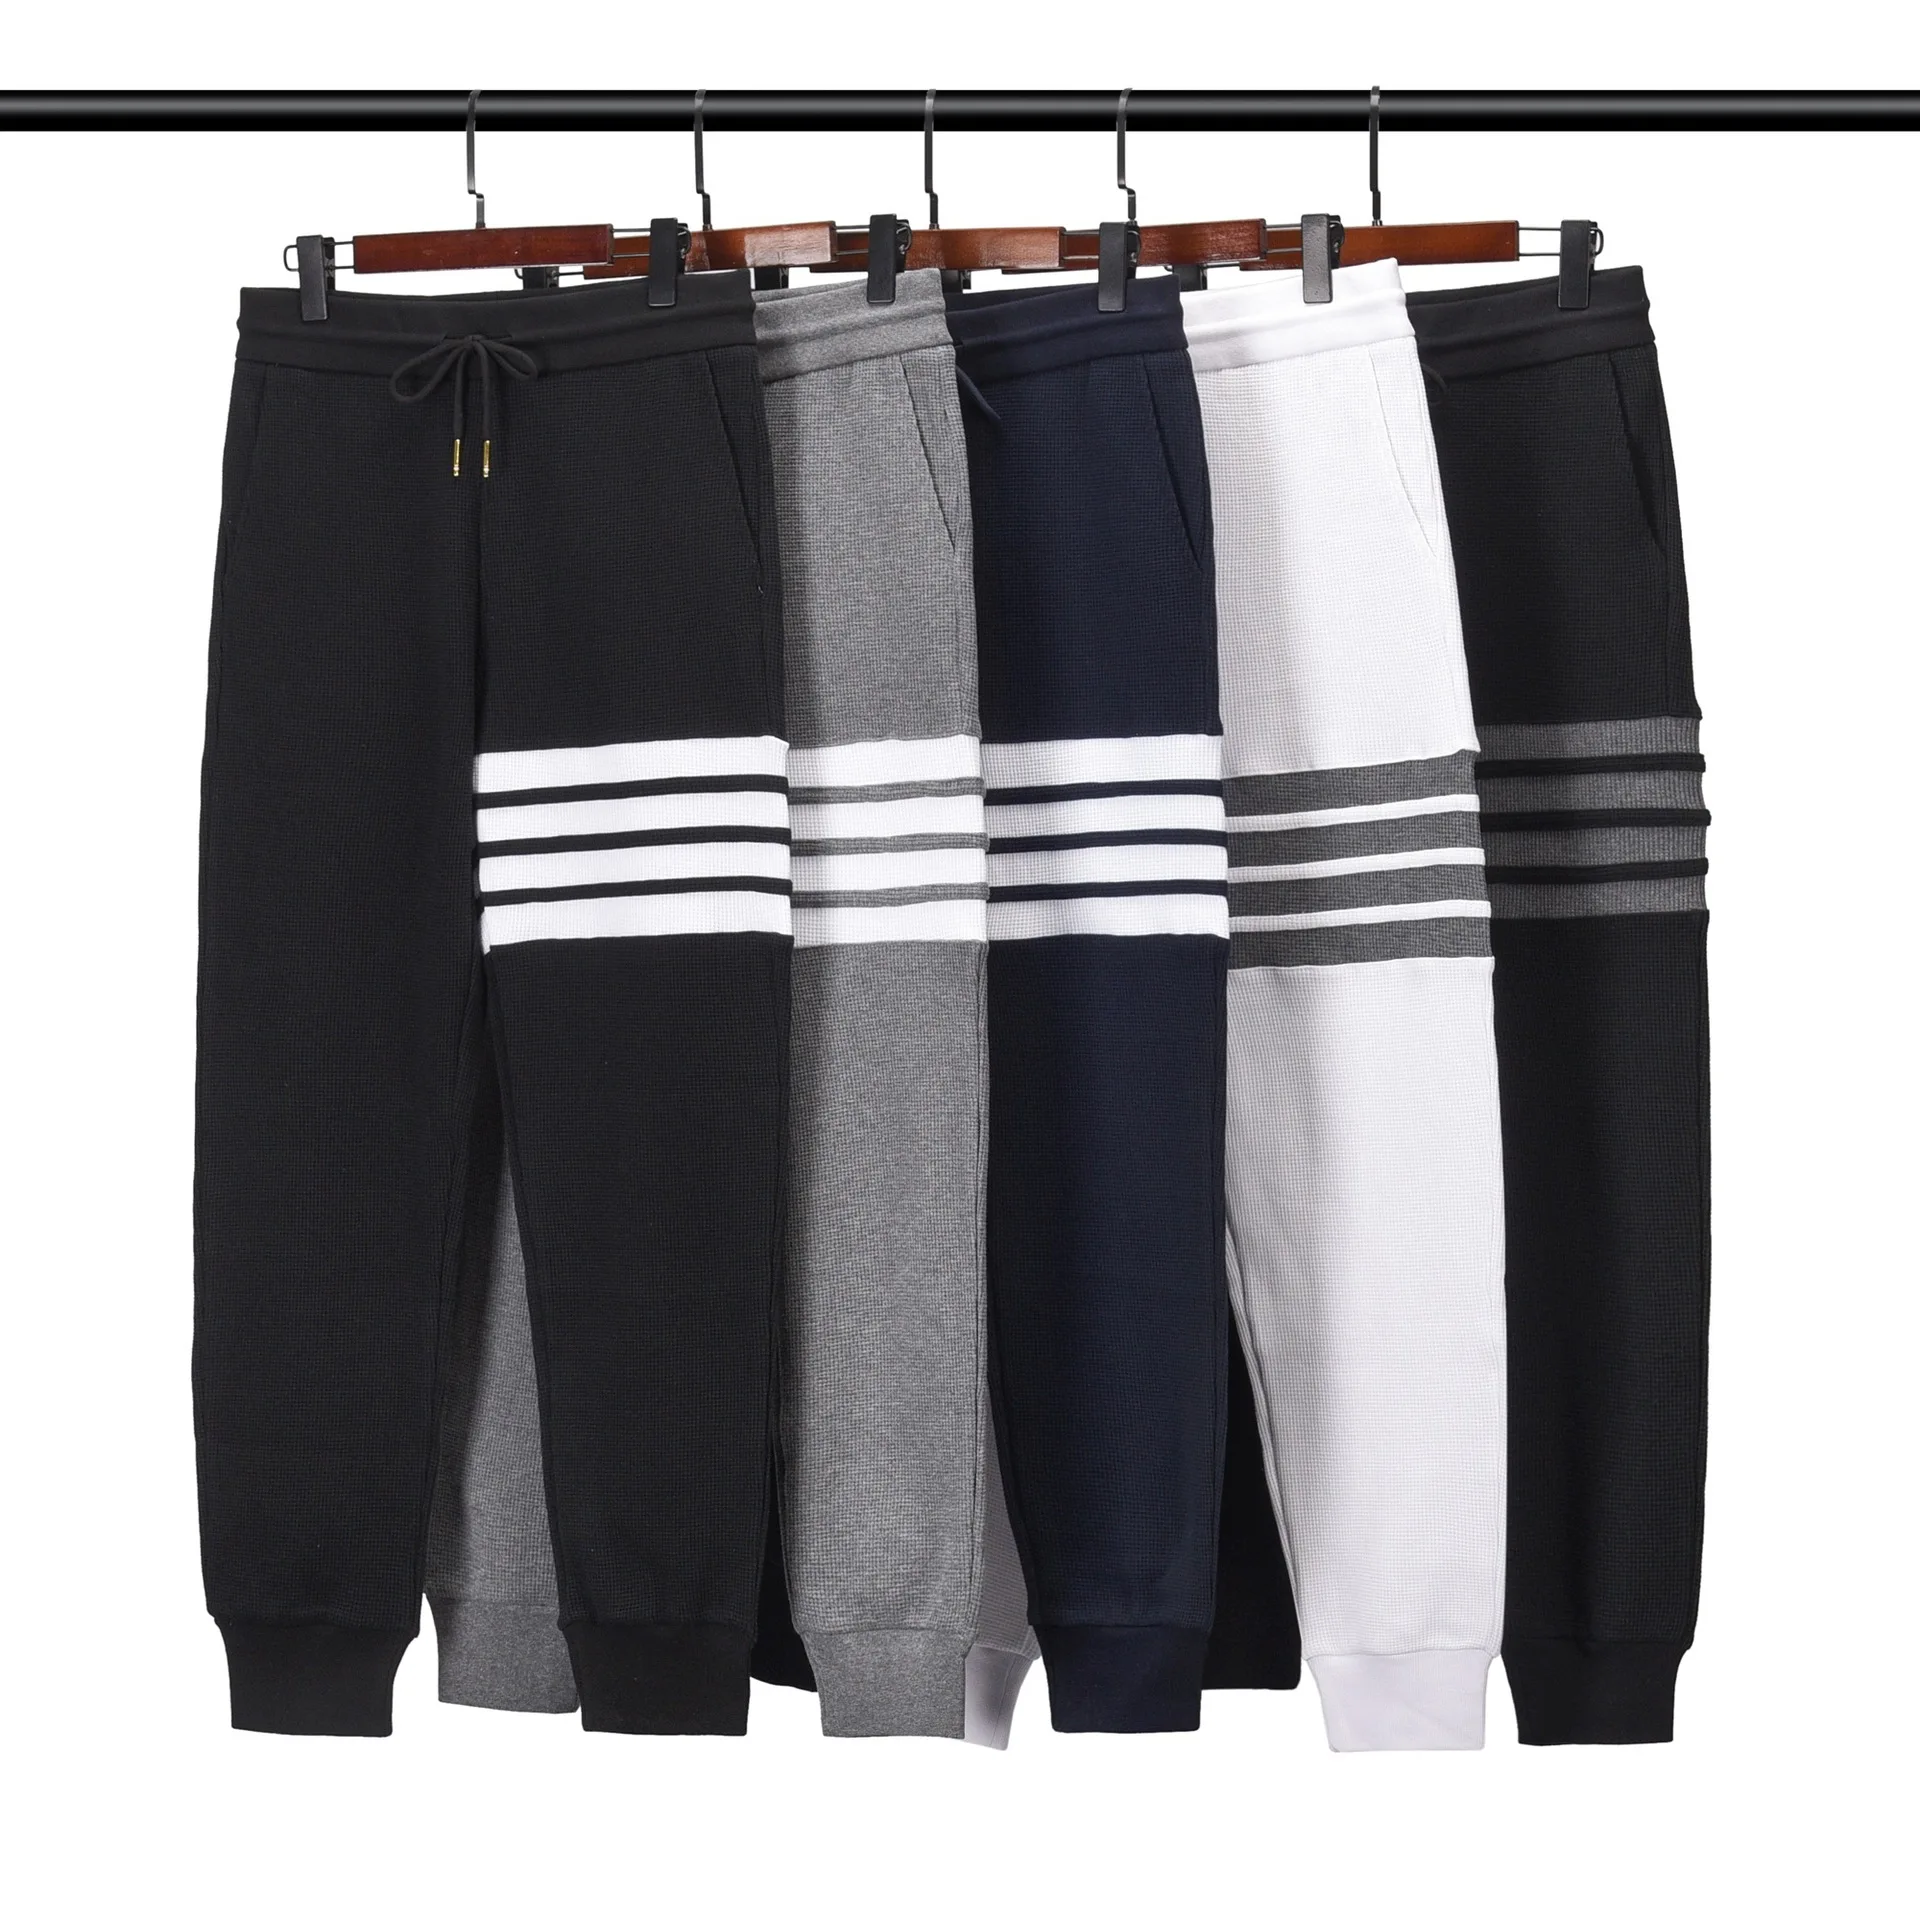 TB Thom Sports Casual Waffle Sweatpants Tide Spring Autumn Couples Men Women Four Striped Cotton Slim-Fit Trousers Black Gray